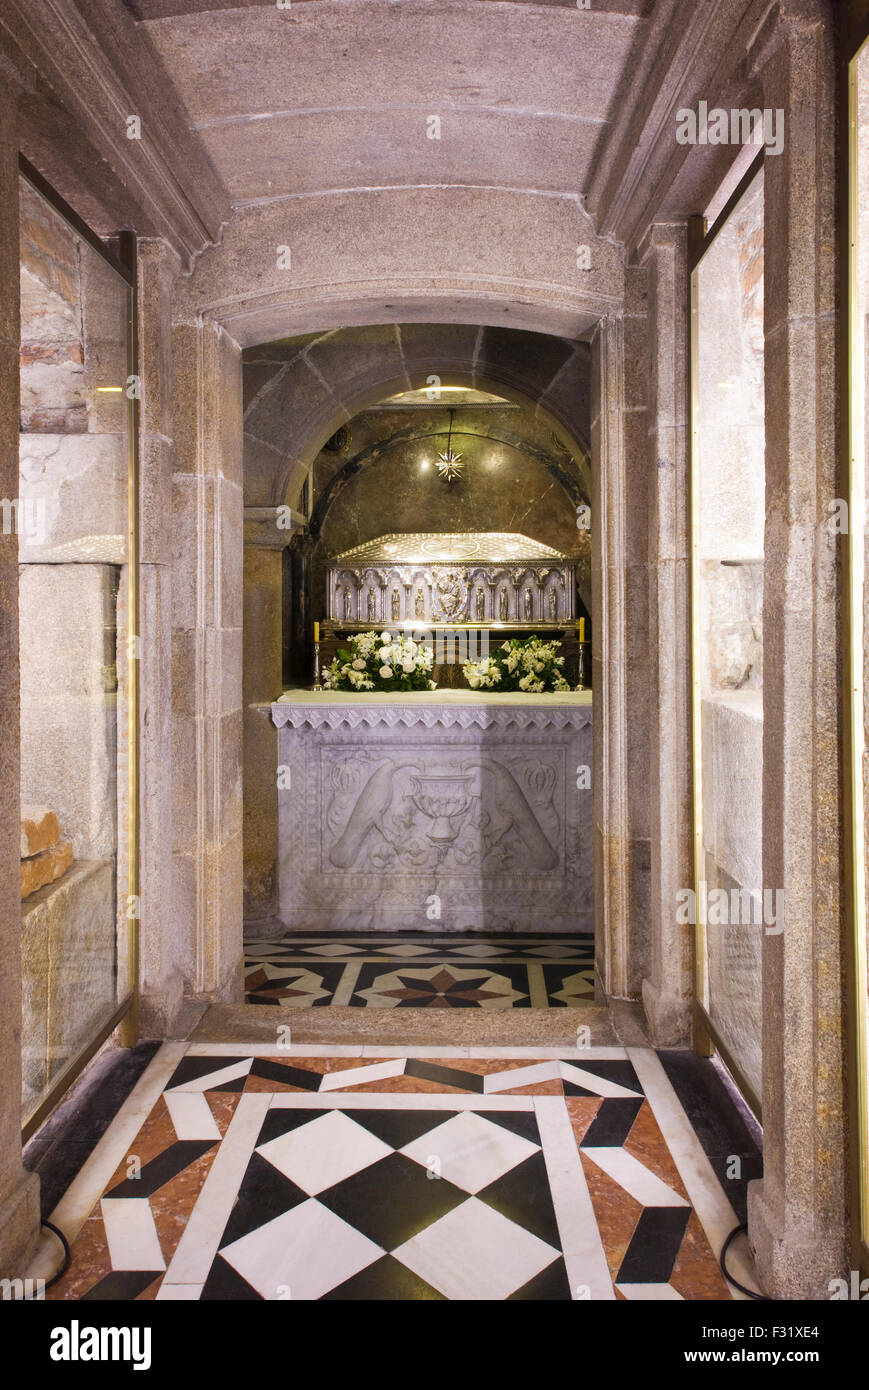 Tomb of Saint James the Great in the Cathedral of Santiago de Compostela Stock Photo